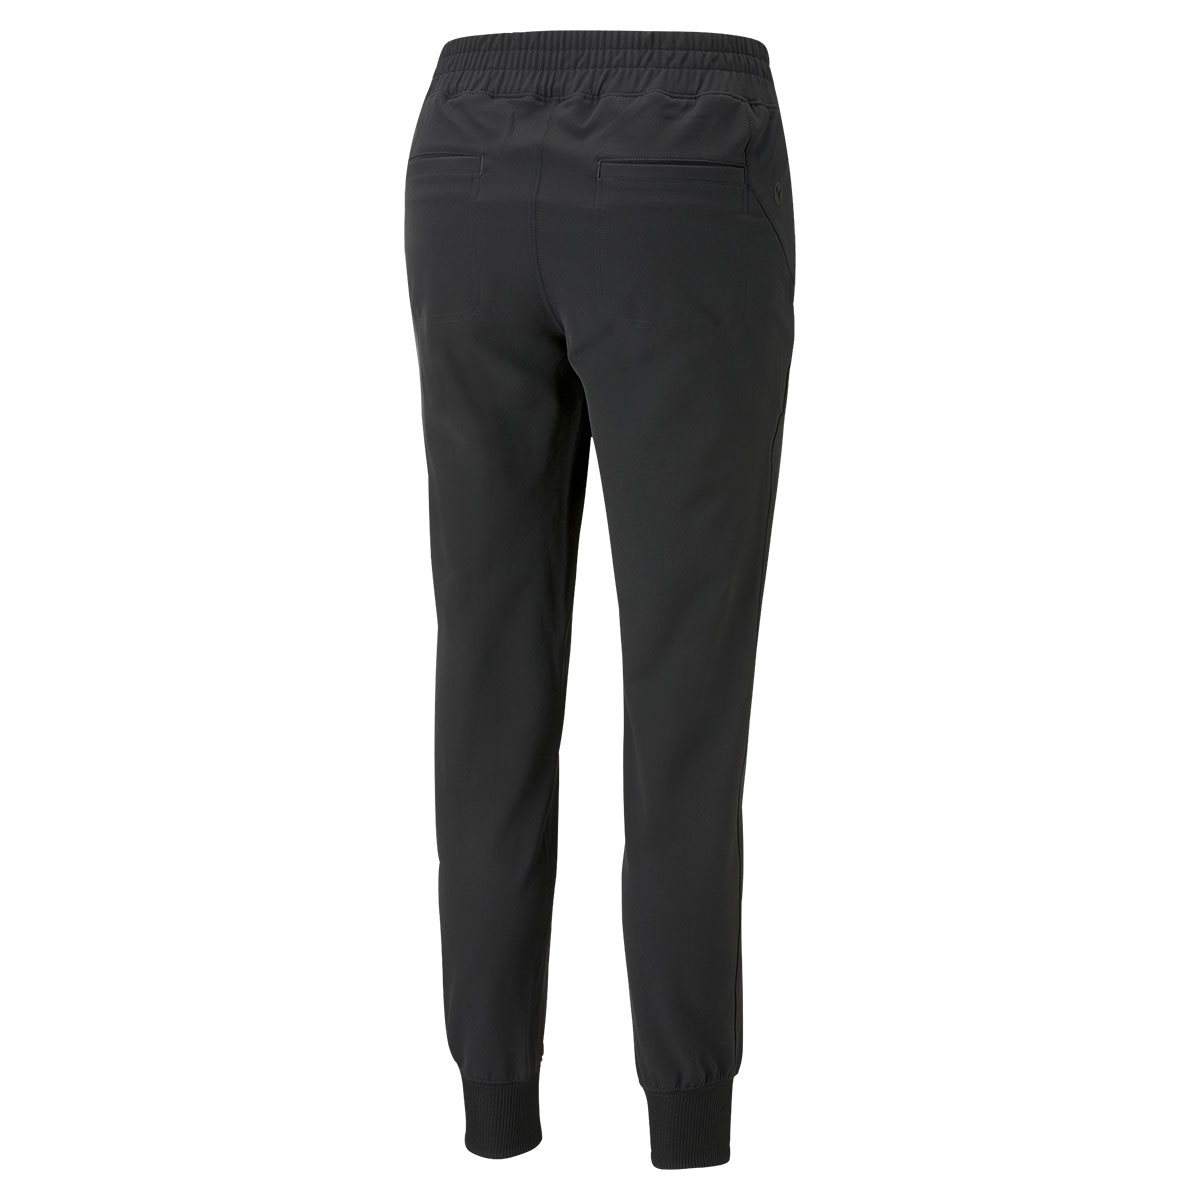 PUMA Ladies Pierview Jogger Golf Trousers from american golf